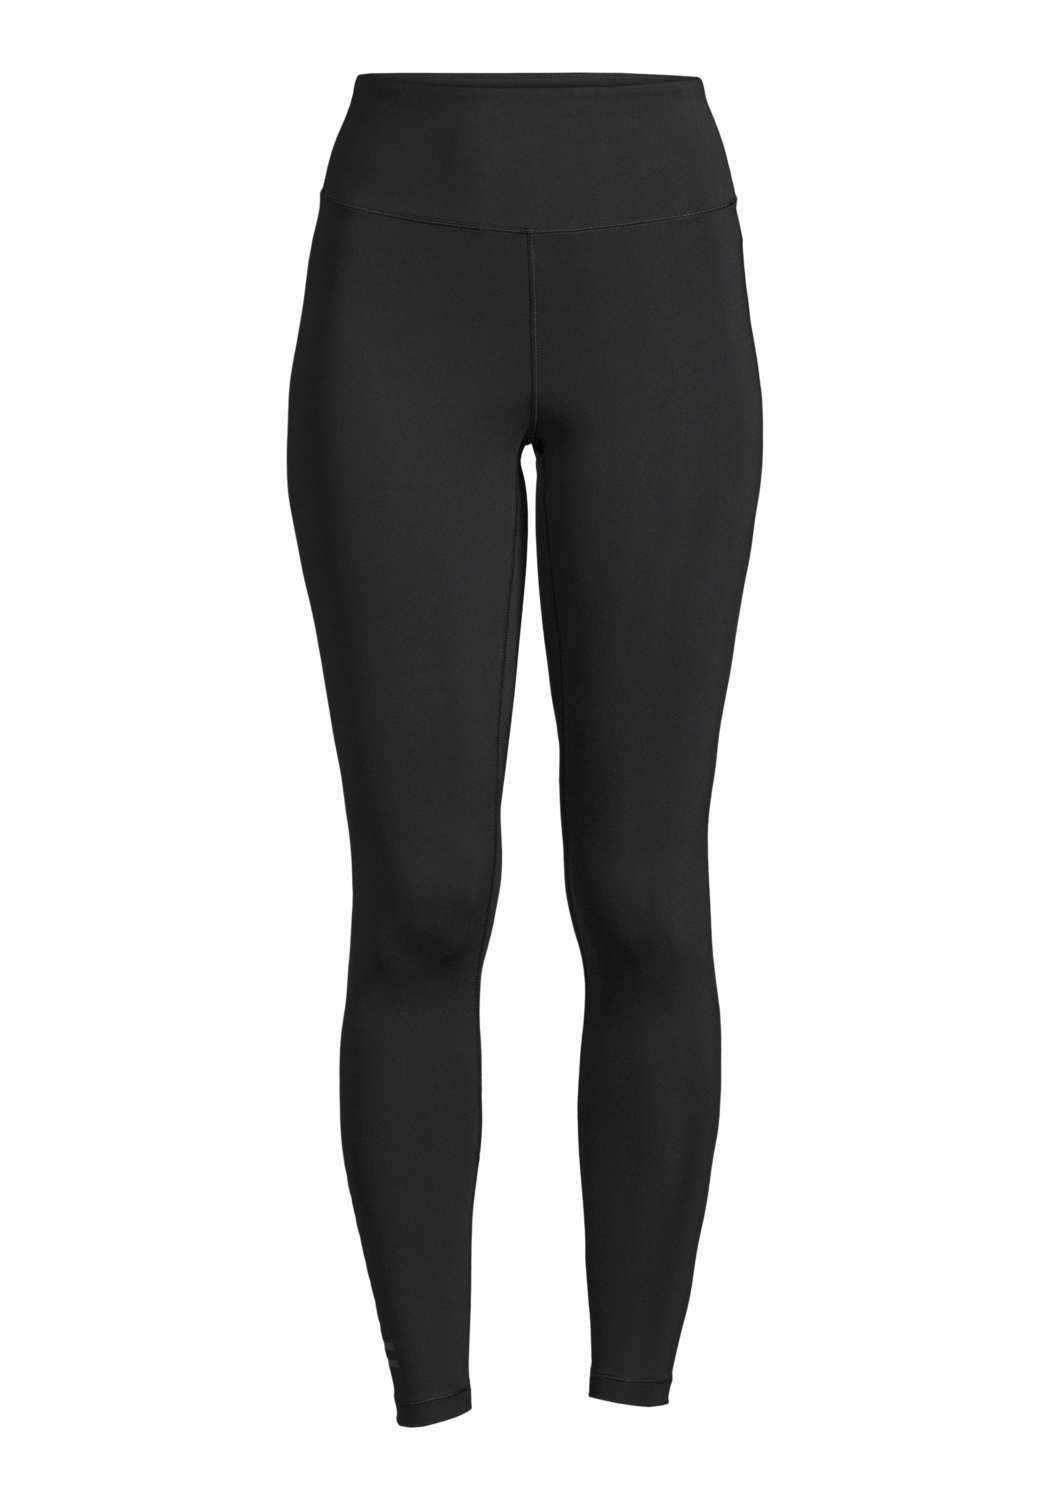 Graphical High Waist Tights